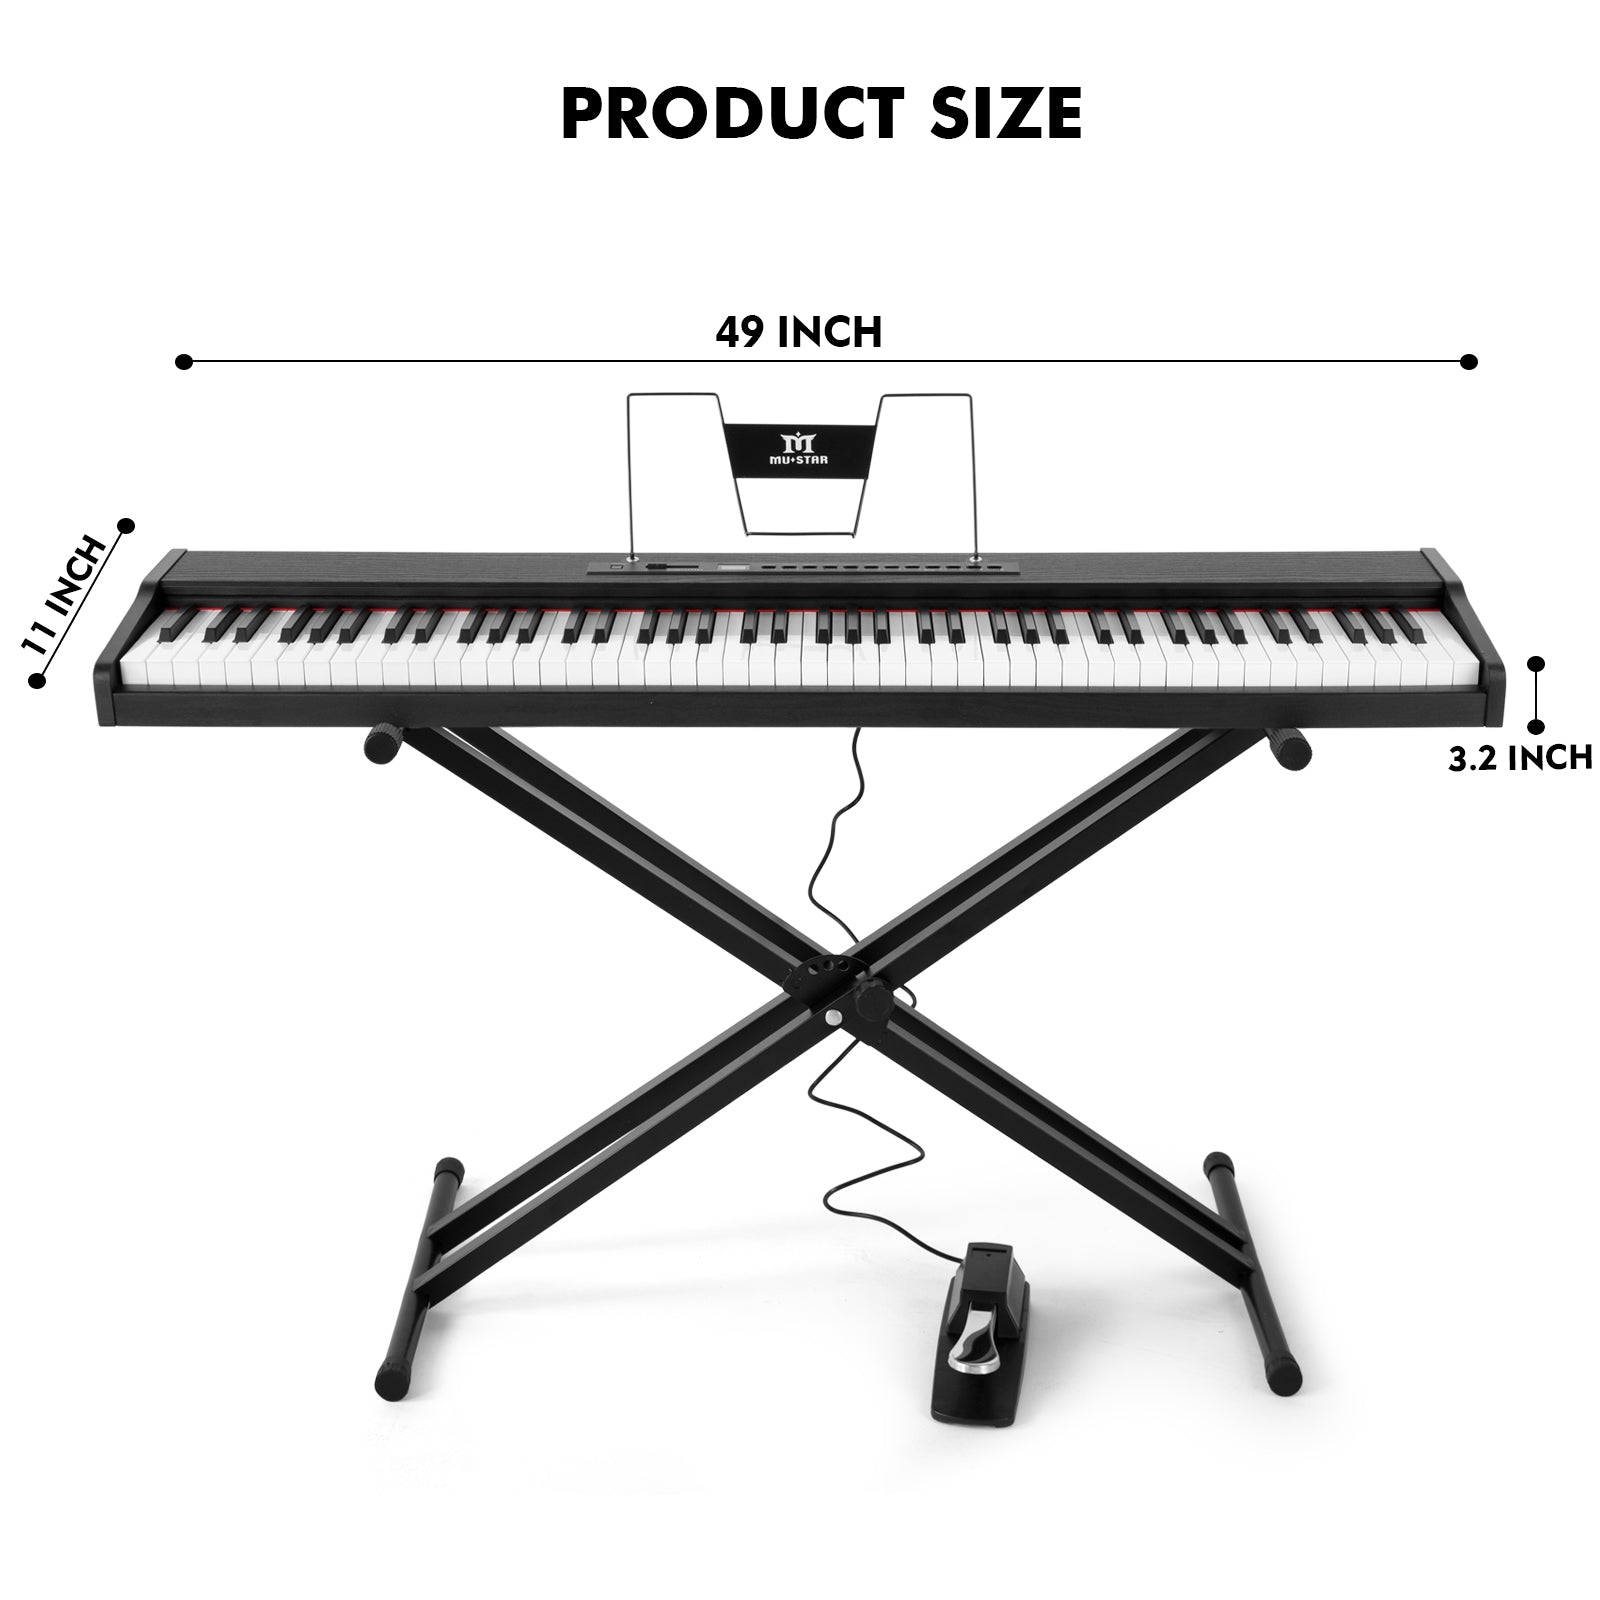 MUSTAR MEP-900, Digital Piano 88 Keys Electronic Keyboards, Semi Weighted Electric Piano, Bluetooth Connection, Sustain Pedal, Black